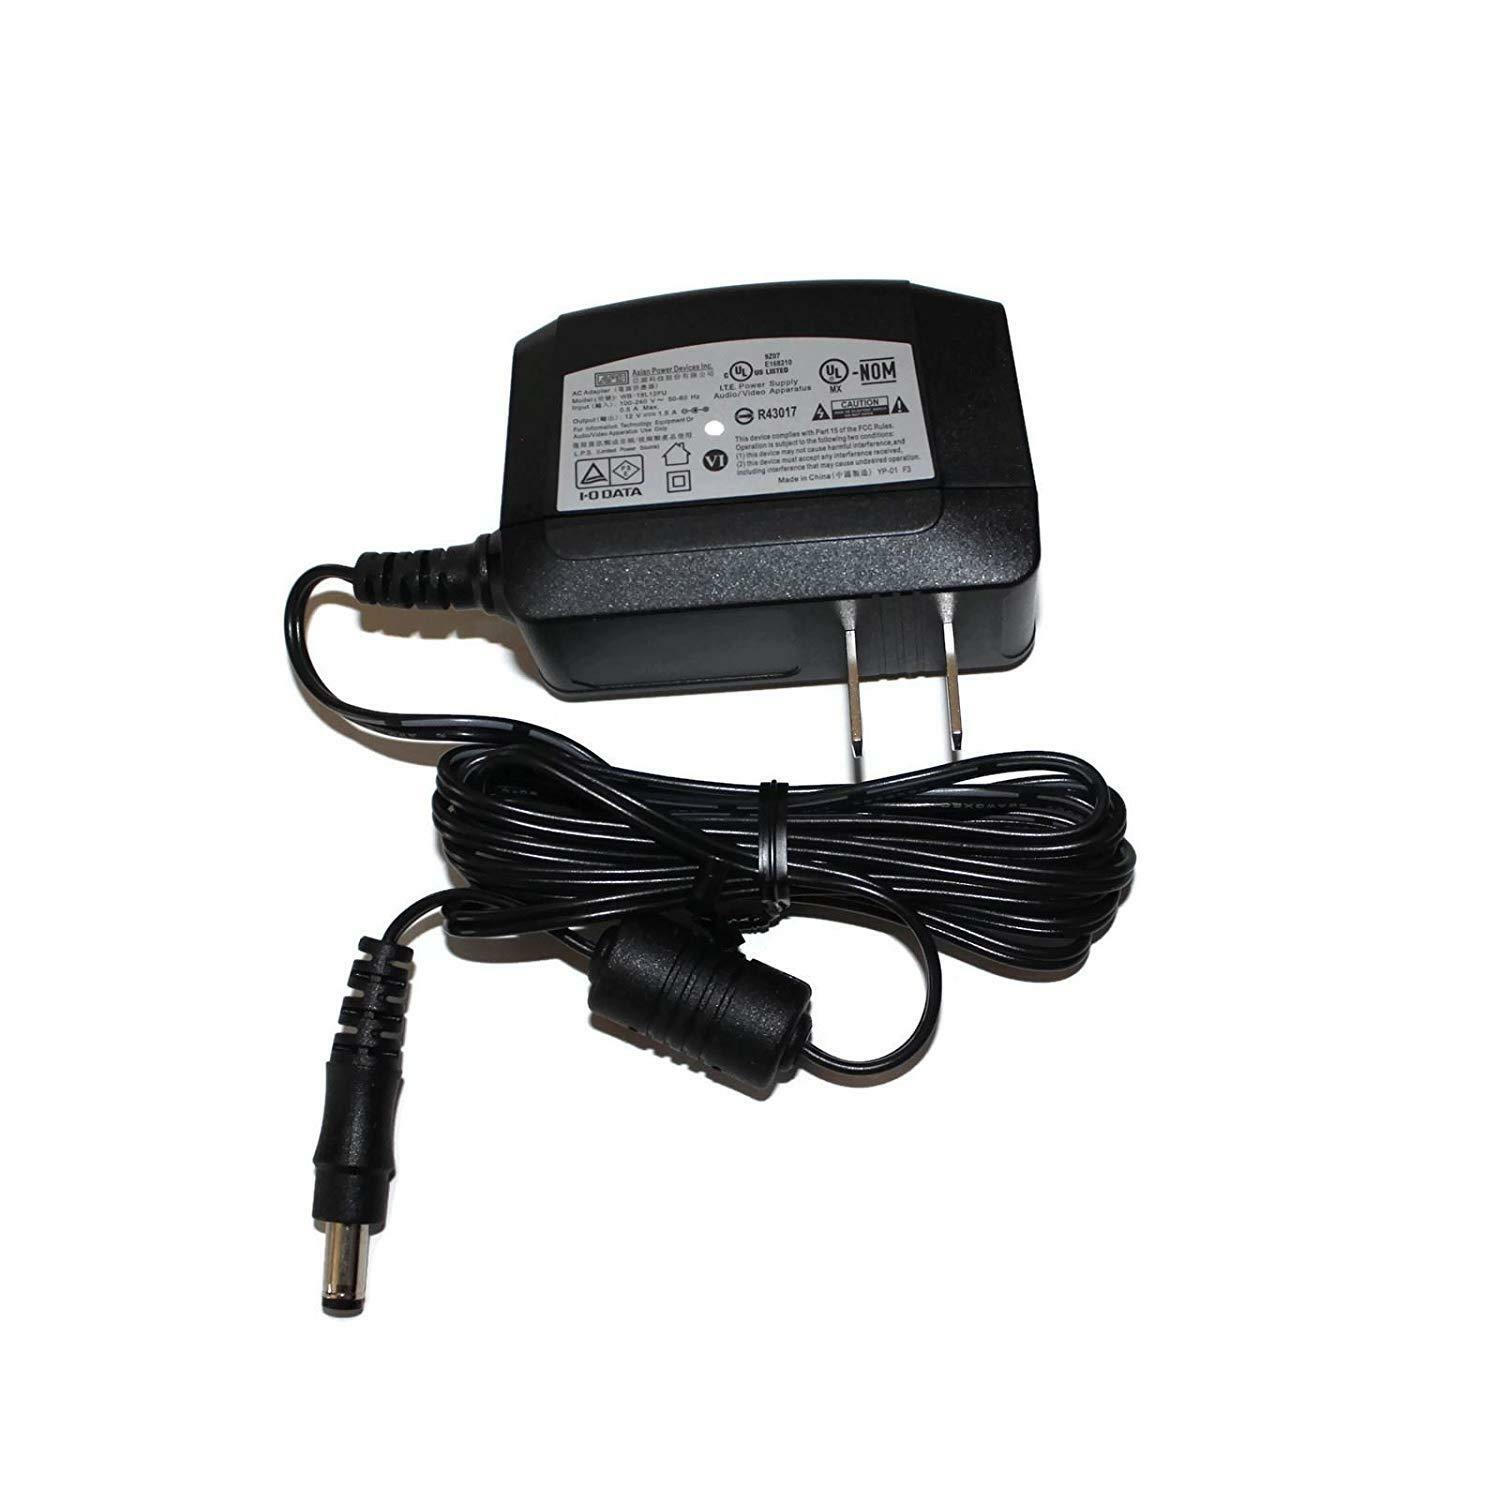 12V 1.5A APD AC Adapter 120-240V 50-60Hz for WD/Seagate HDD WB-18L12FU Model: WB-18L12FU Type: AC/DC Adapter Brand - Click Image to Close